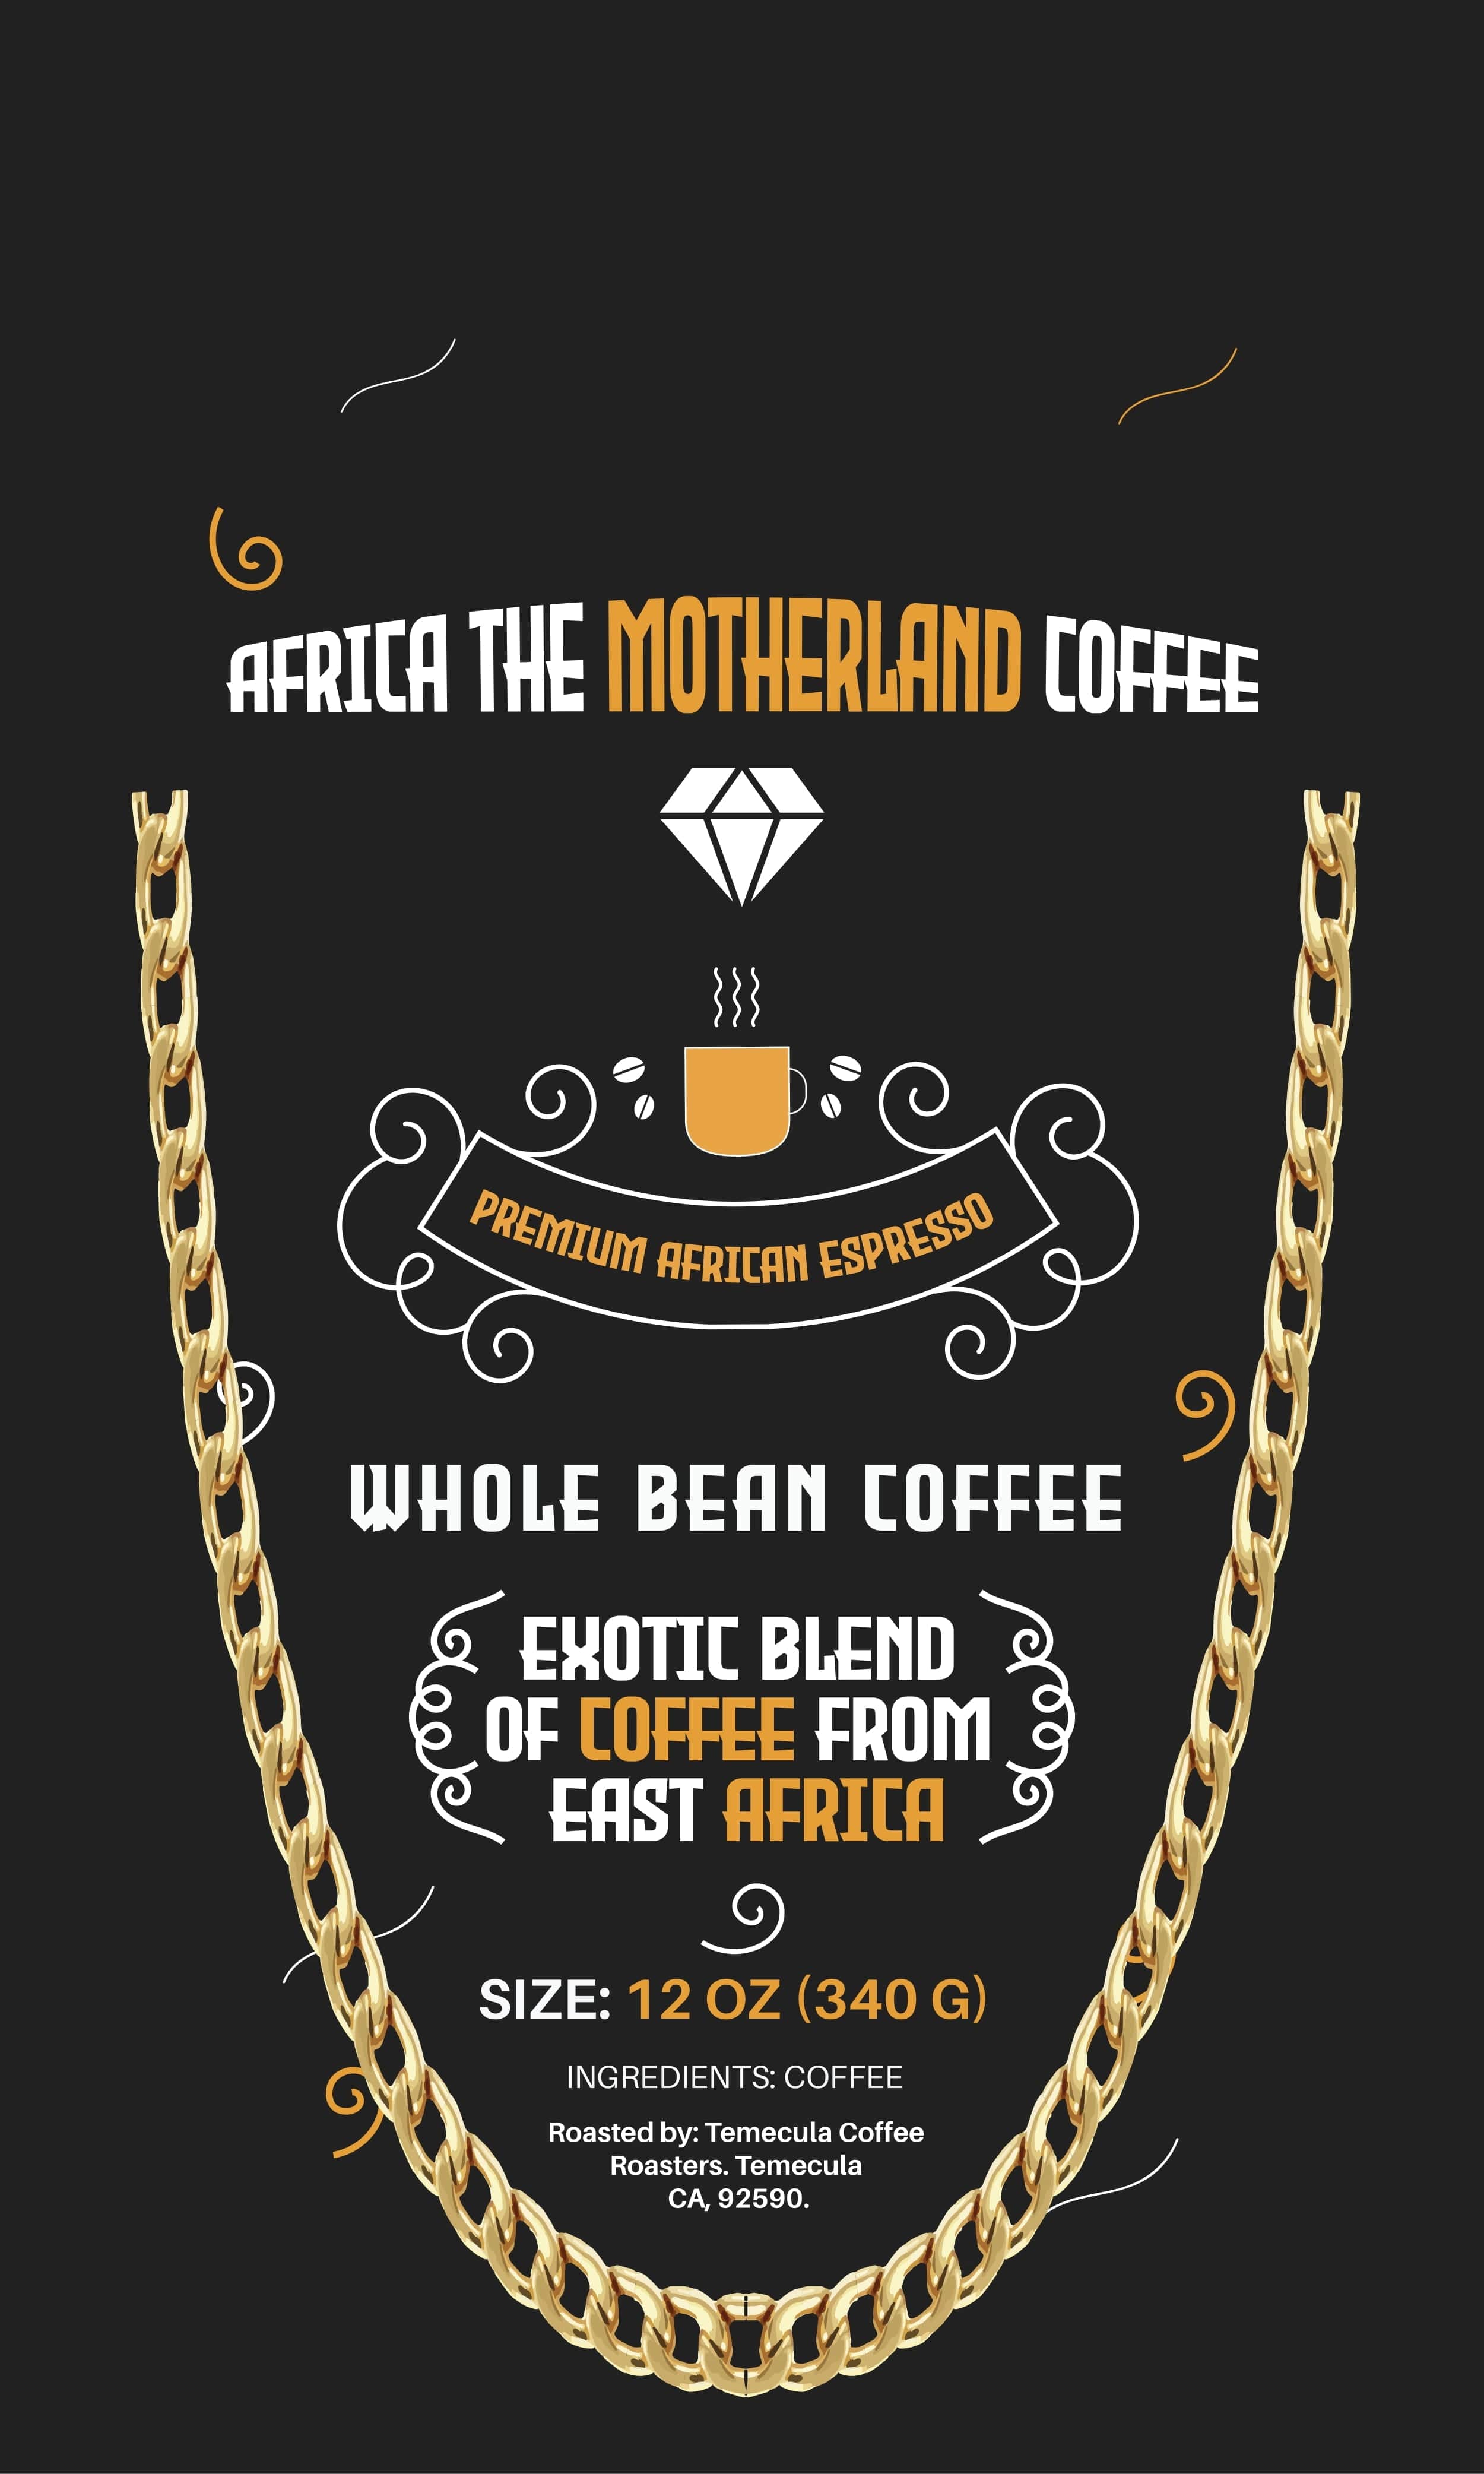 VVS Jewelry hip hop jewelry Whole / 12oz Africa the Motherland Coffee